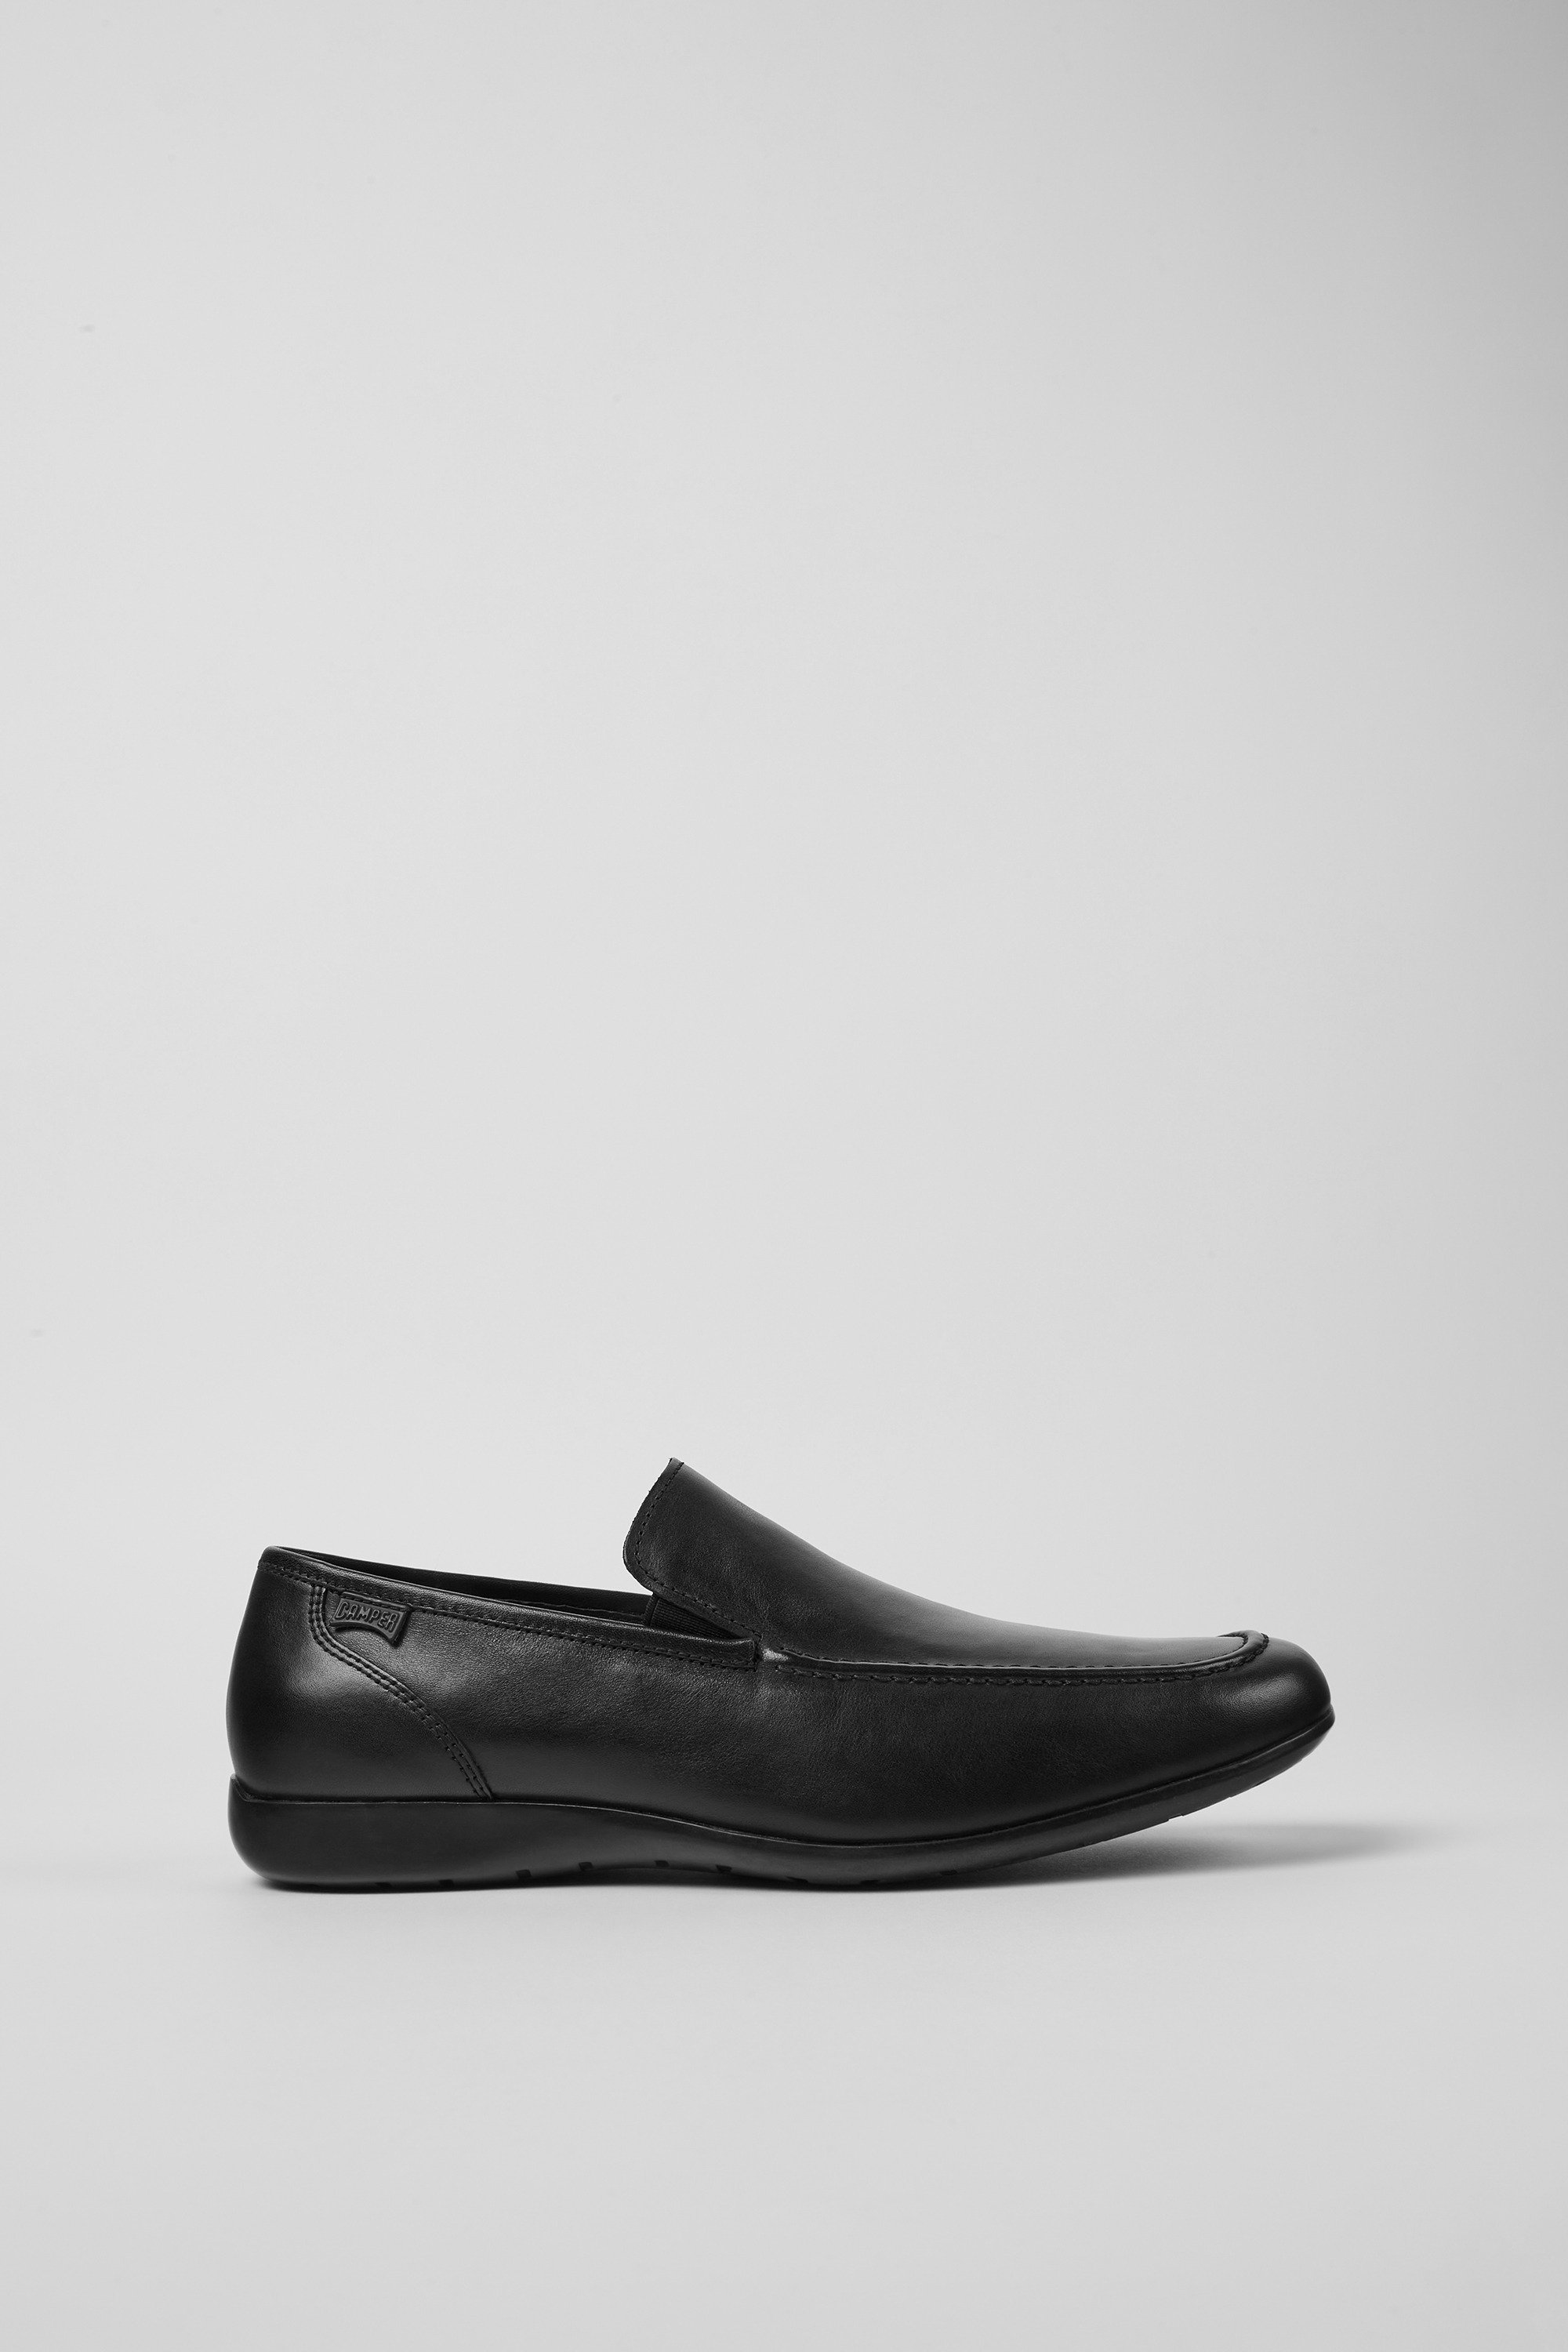 mauro Black Formal Shoes for Men - Autumn/Winter collection